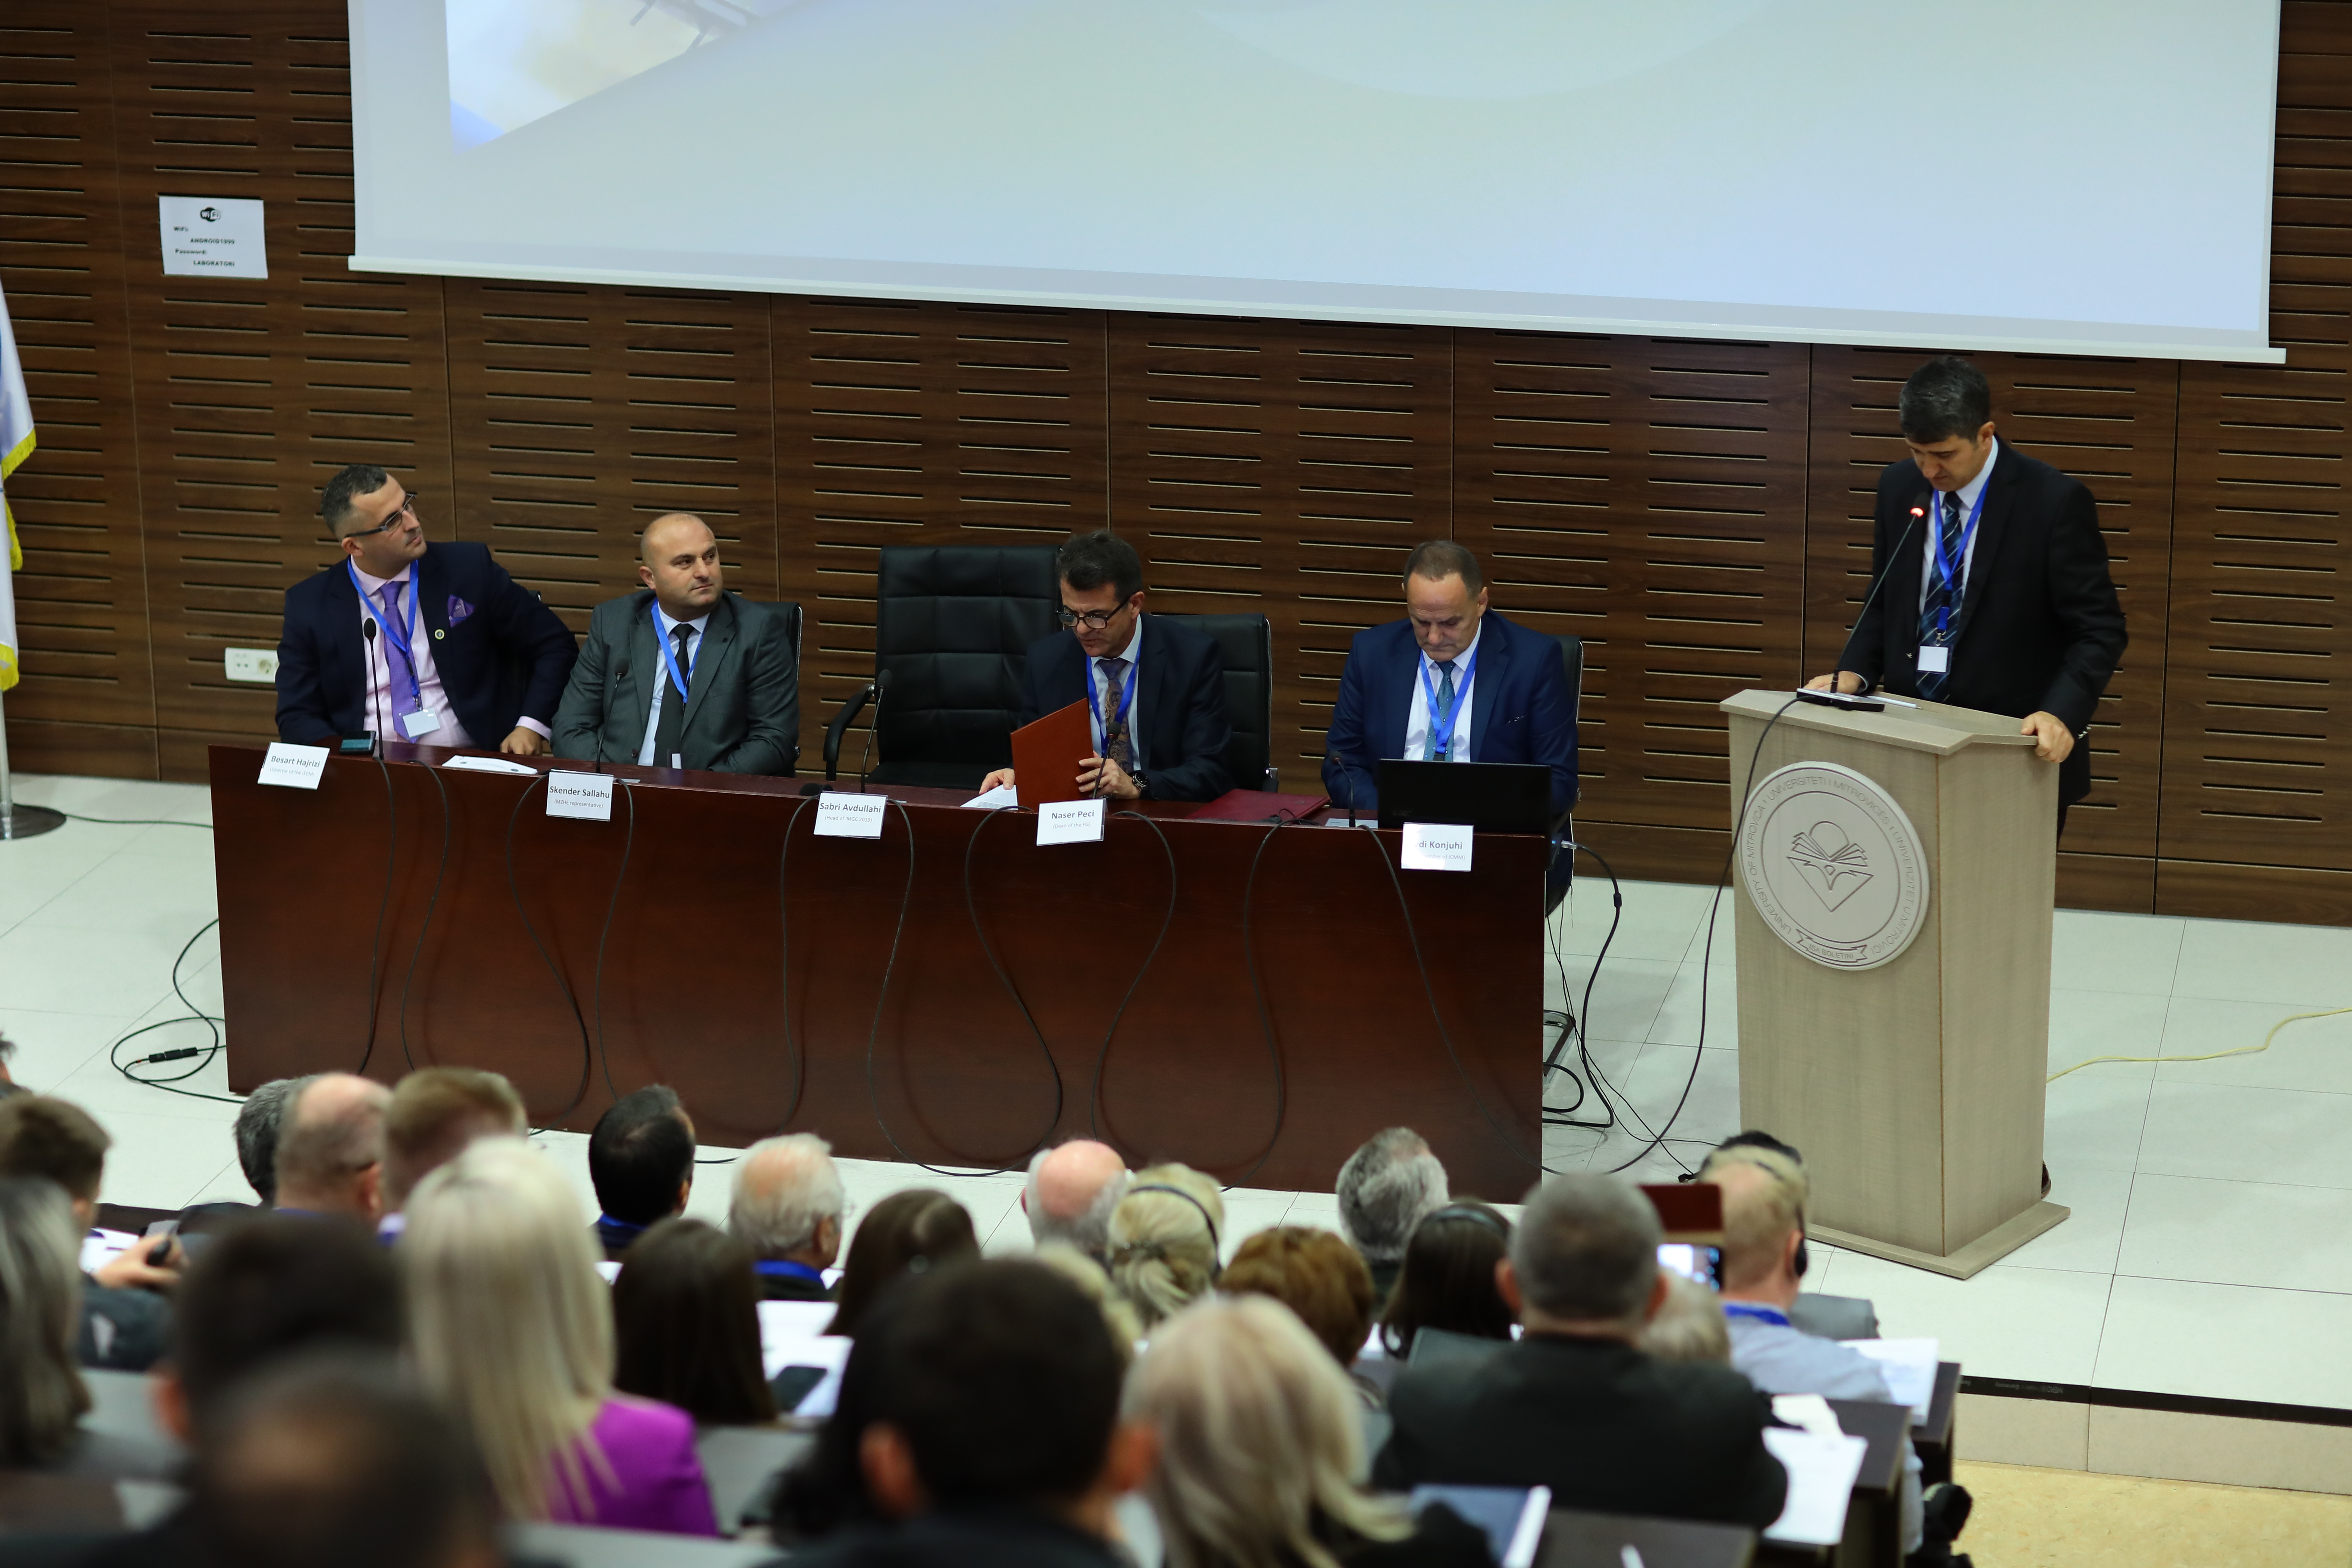 Speech By Prof. Sabri Avdullahi At The Opening Of The "International Conference On Geoscience"